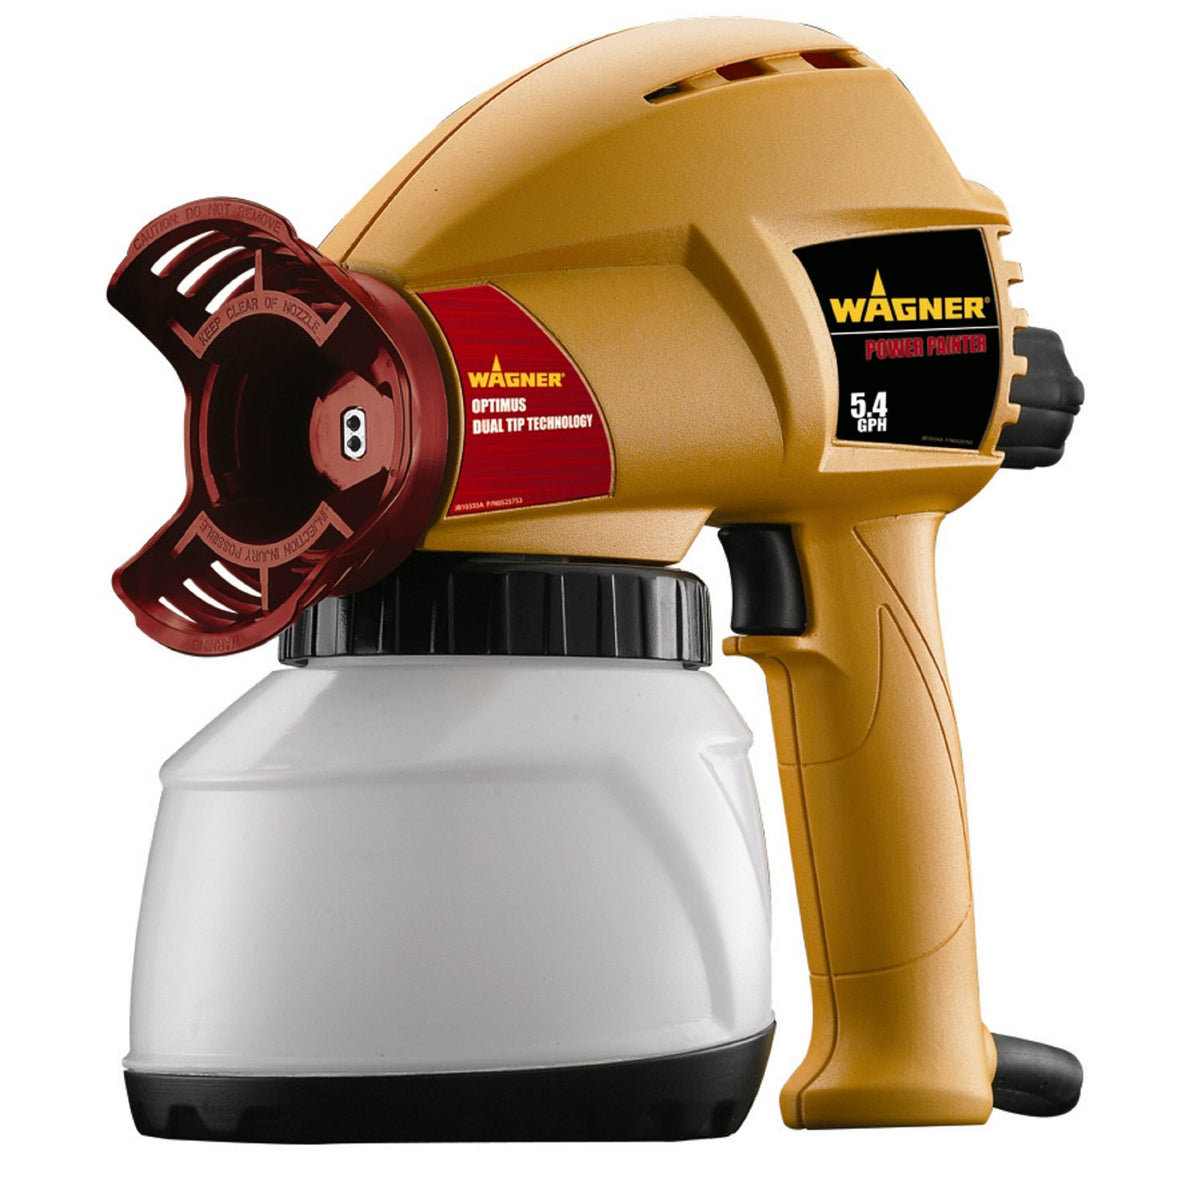 Wagner 0525000 Power Painter With Optimus, 5.4 GPH